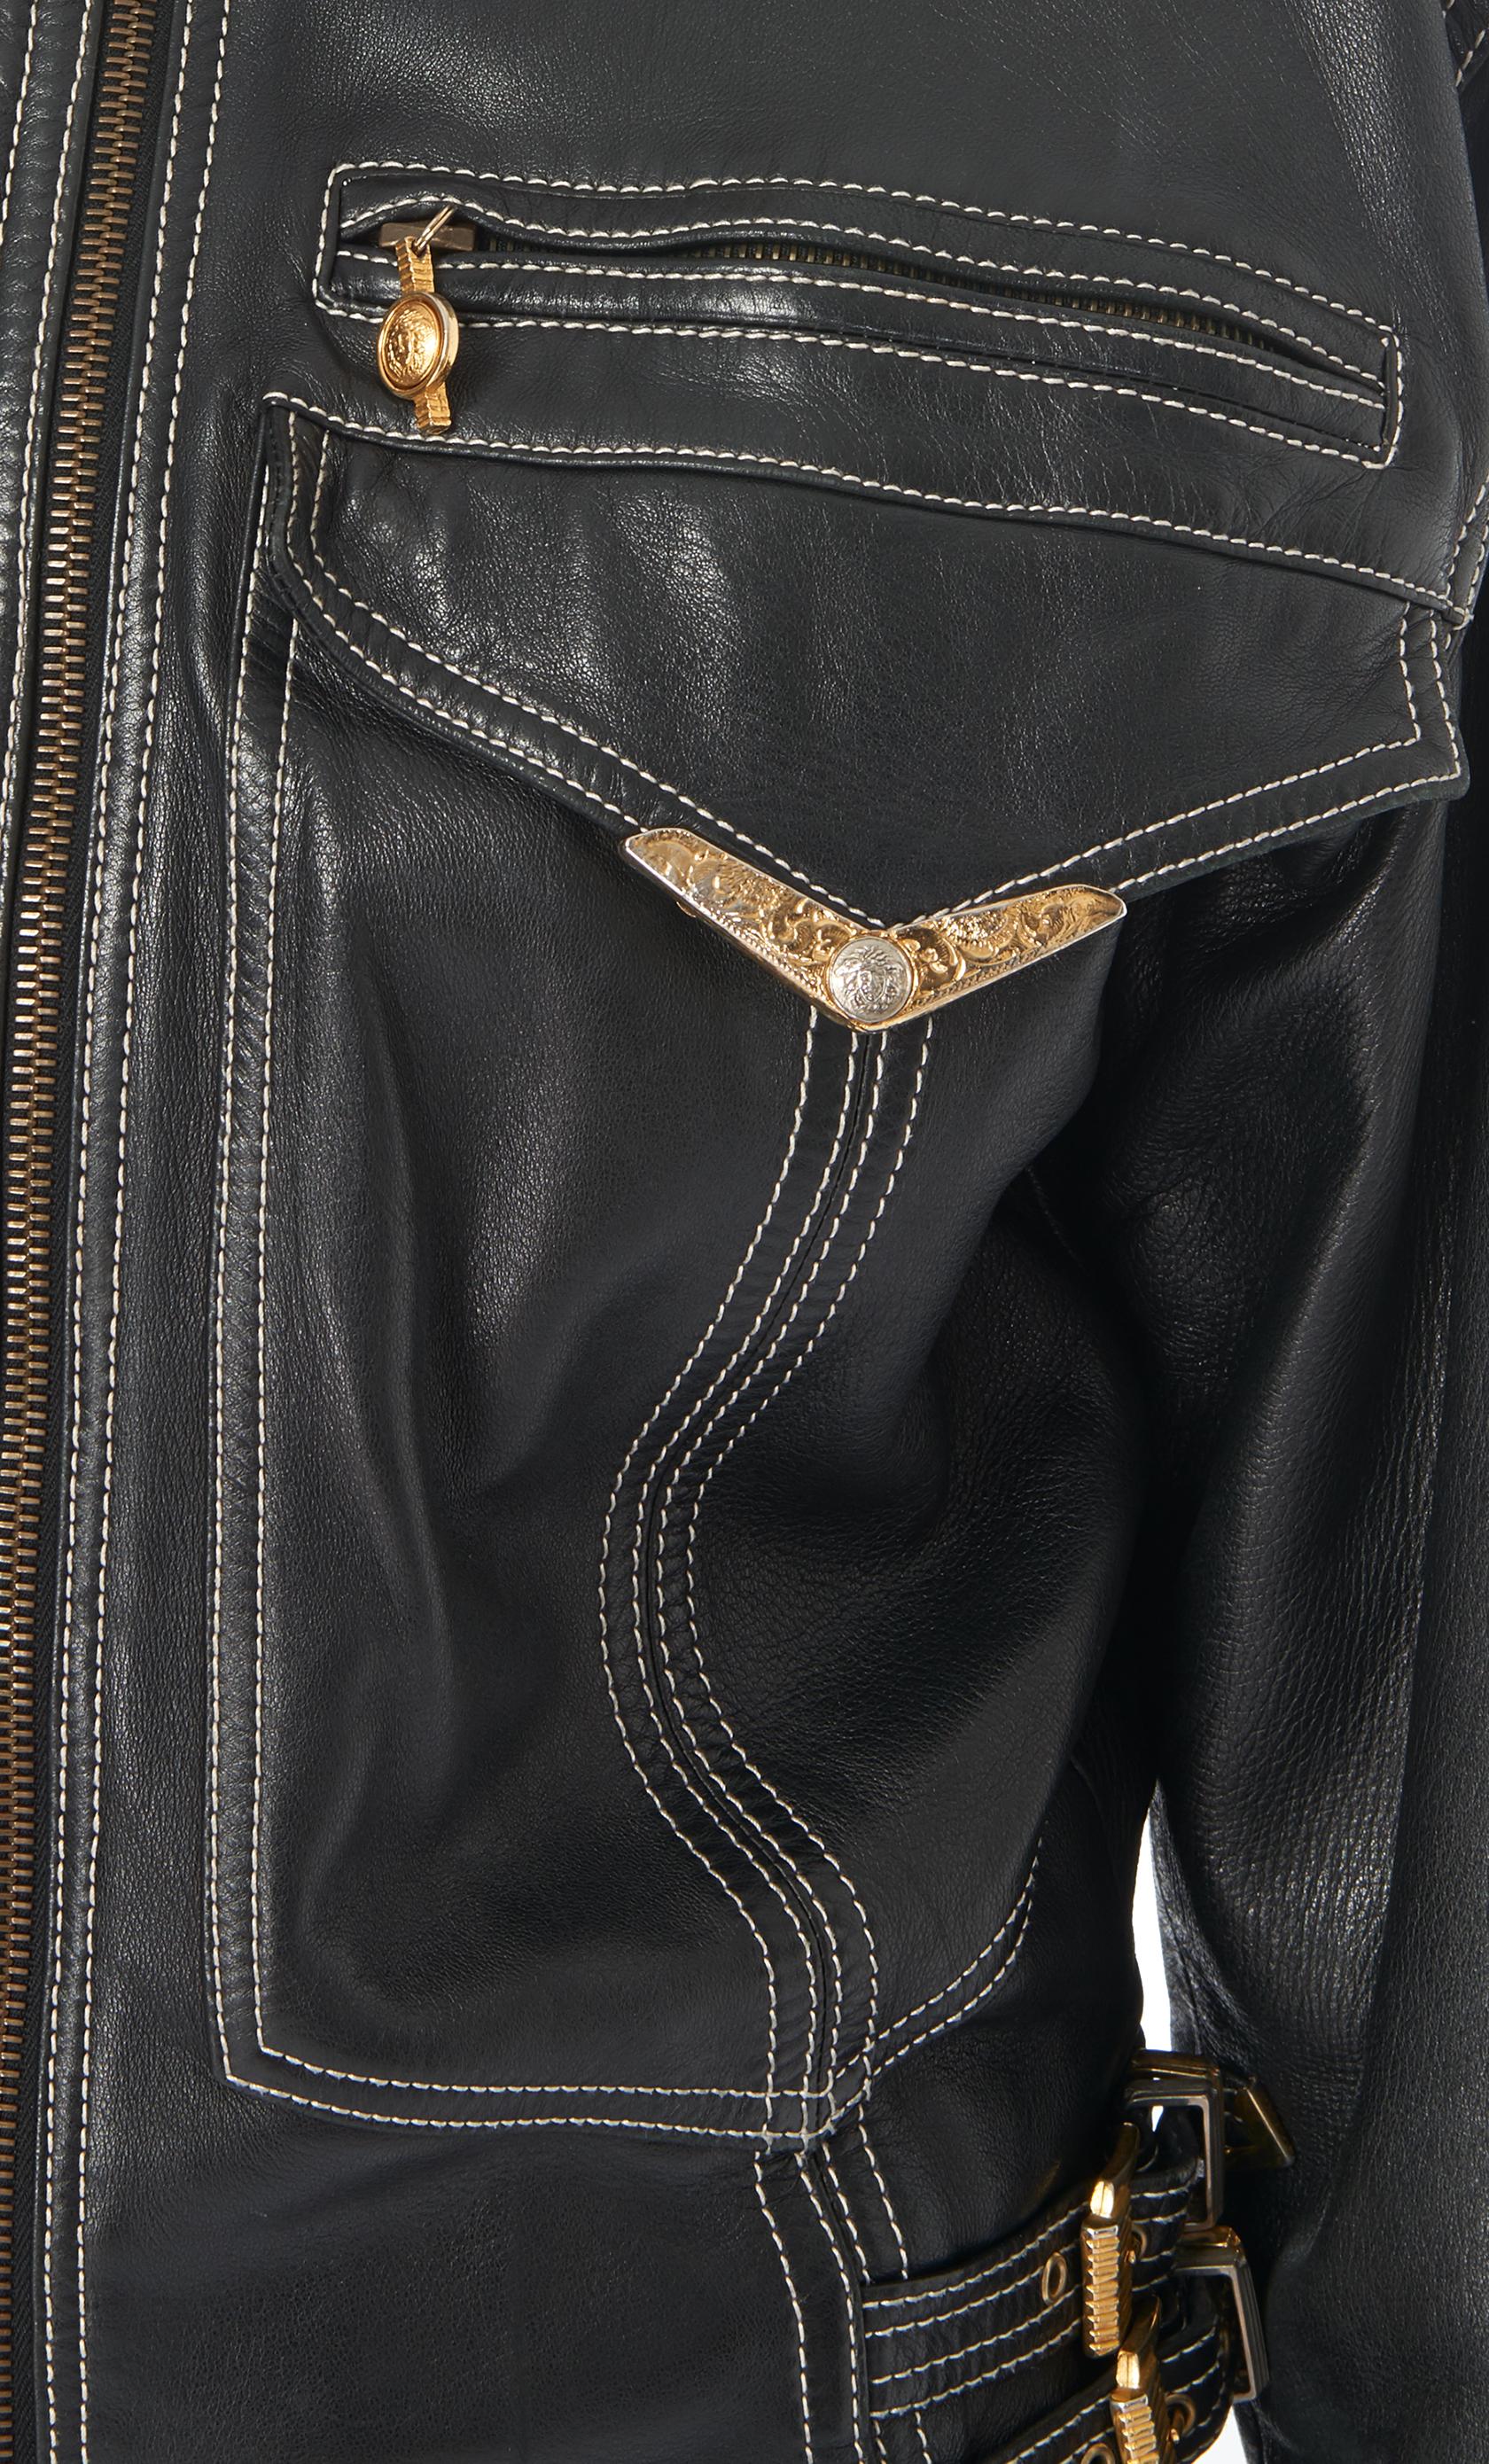 A Gianni Versace black leather Bondage jacket from Gianni Versace's Autumn/Winter 1992 Bondage collection. Featuring a pointed collar, long sleeves, a front zip fastening, front flap pockets, white detail stitching and gold and silver tone Bondage